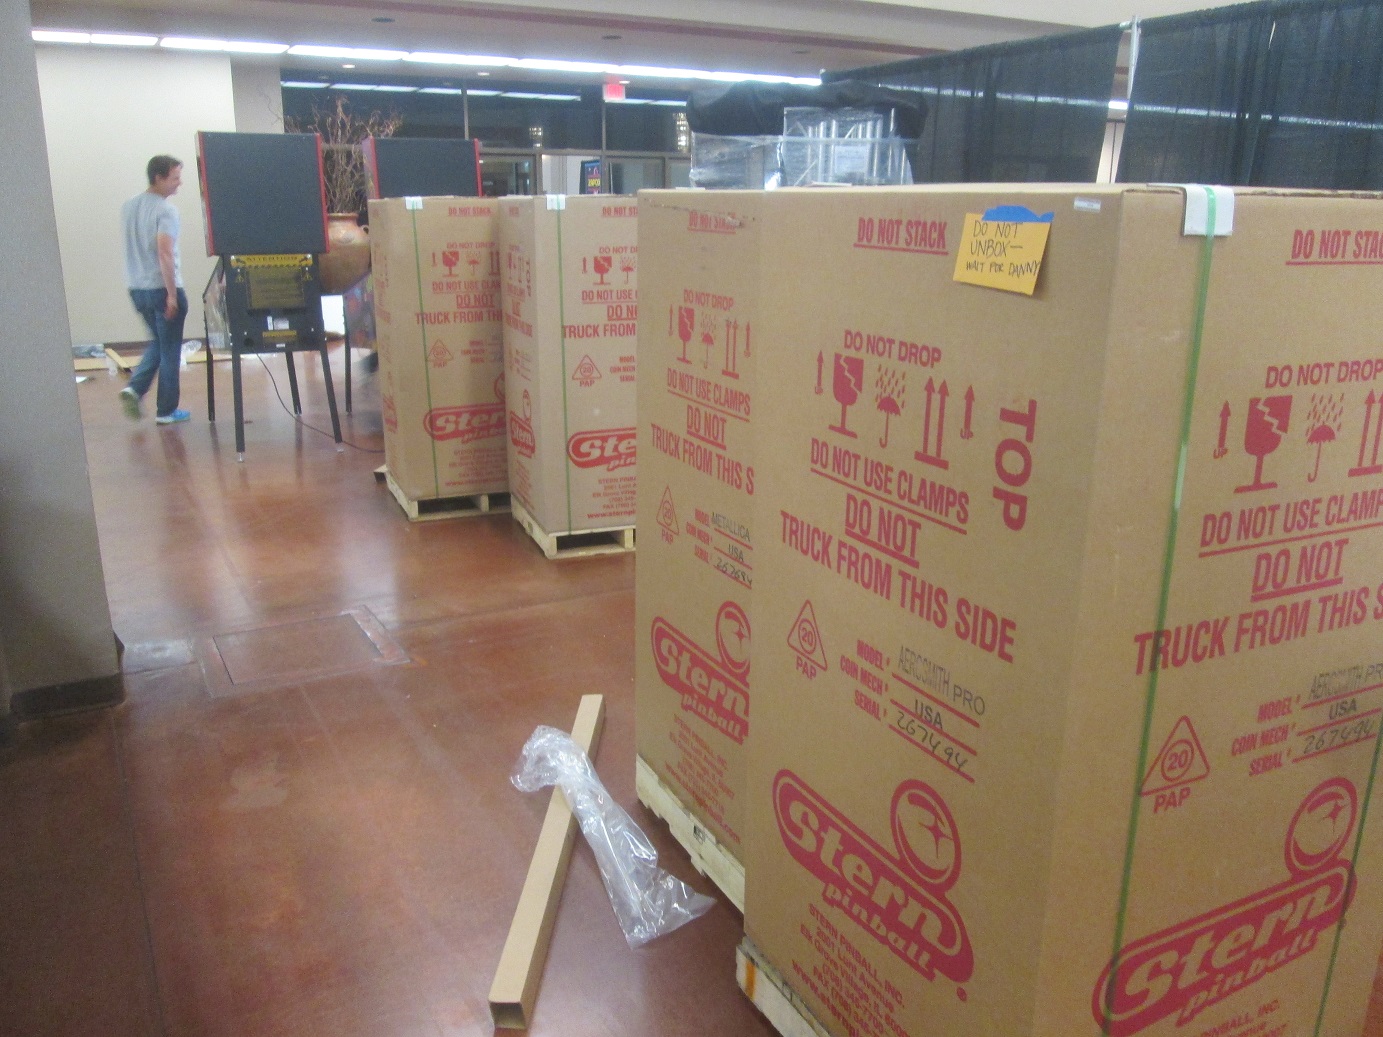 Here was another exciting sight this afternoon: There were ten brand new pinball machines delivered straight to the convention center. They're all available for play all weekend (though some are in the tournament area.)